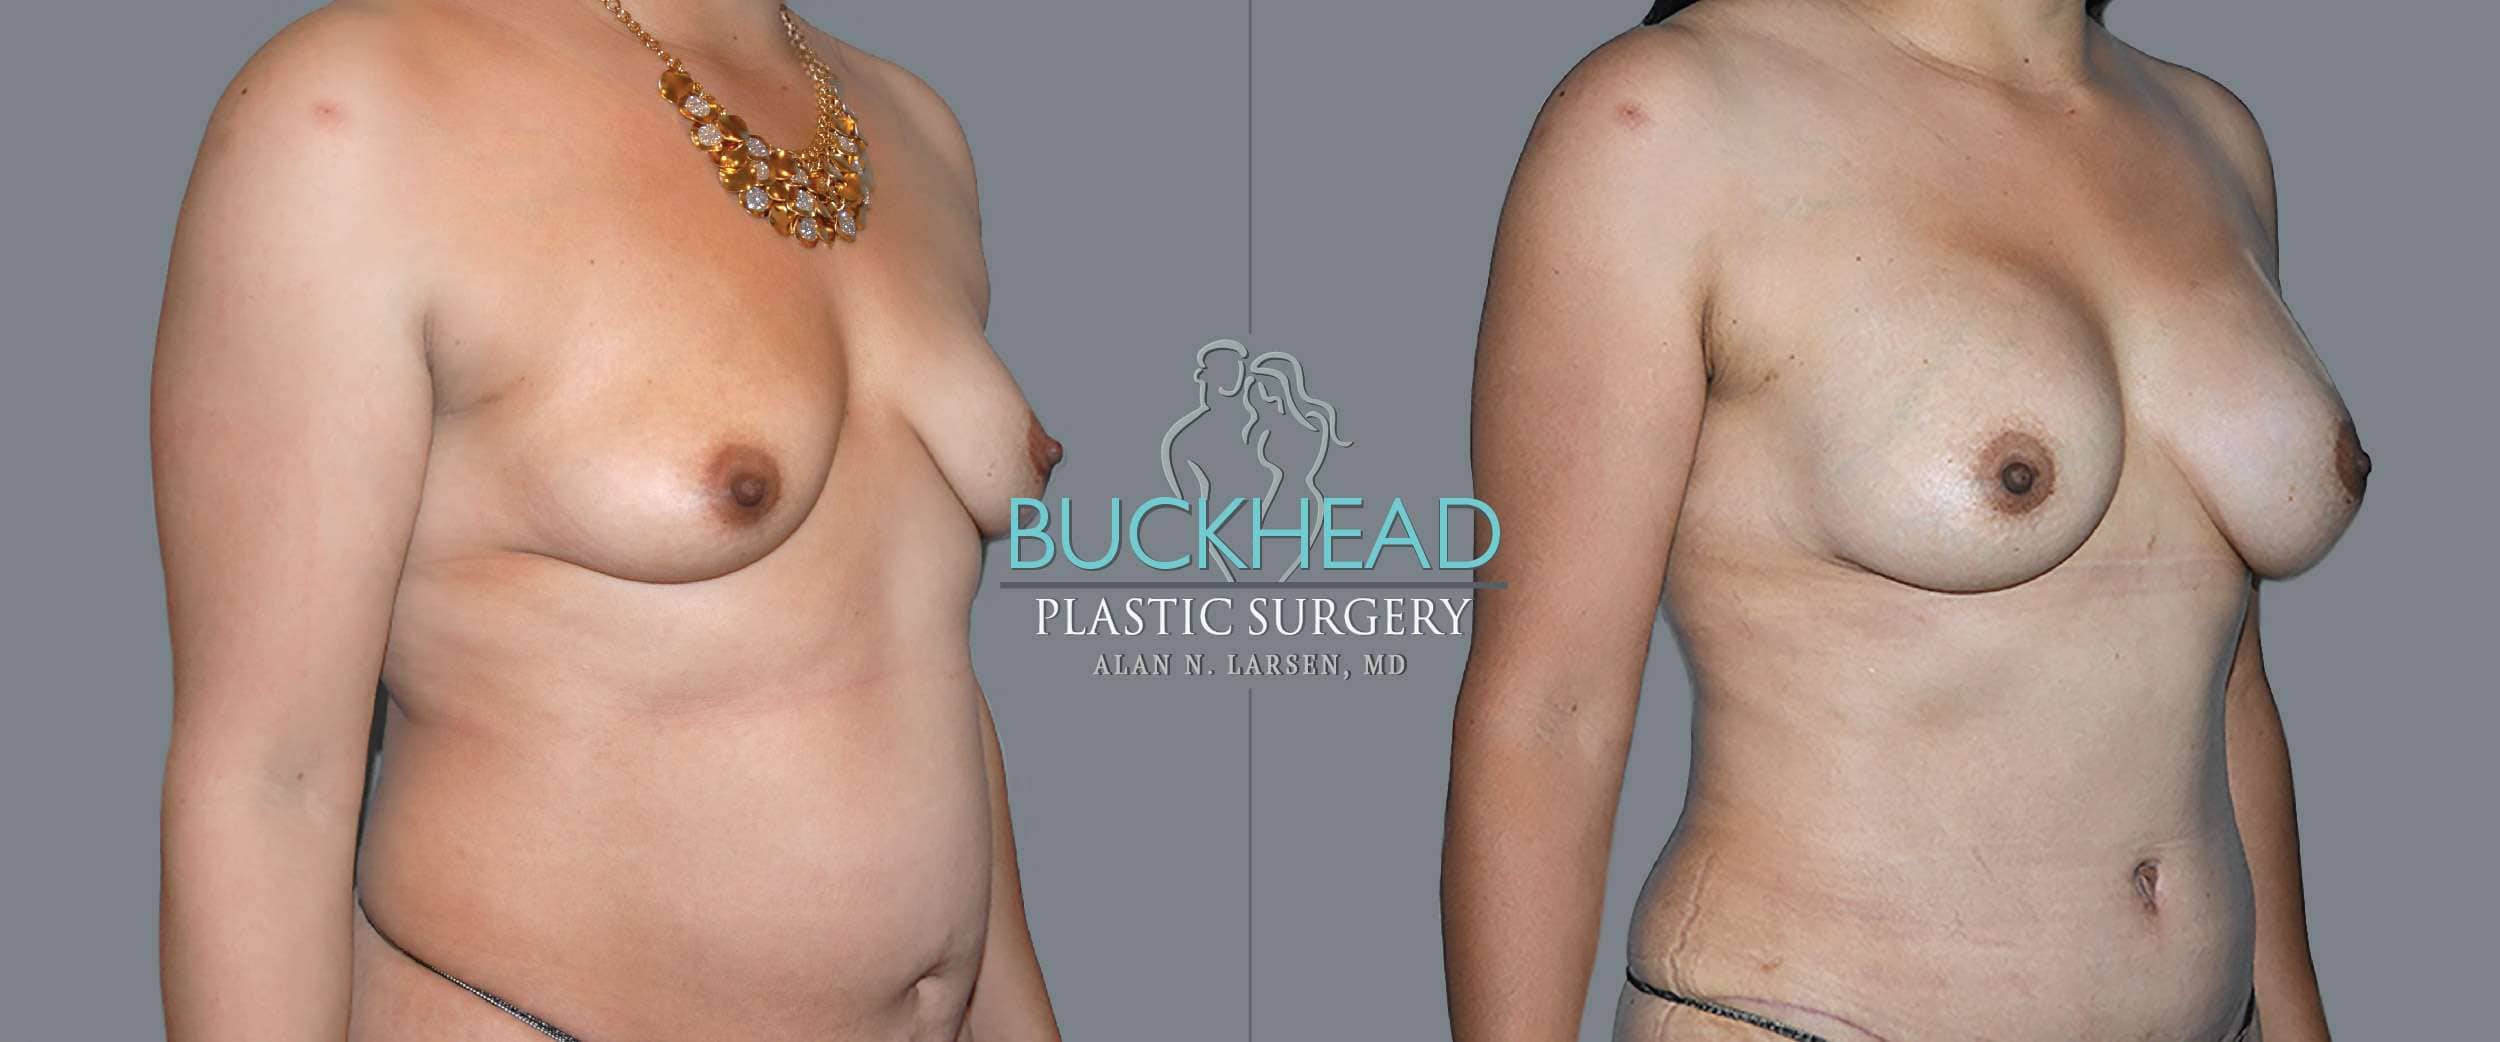 Before and After Photo Gallery | Breast Augmentation | Buckhead Plastic Surgery | Double Board-Certified Plastic Surgeon in Atlanta GA